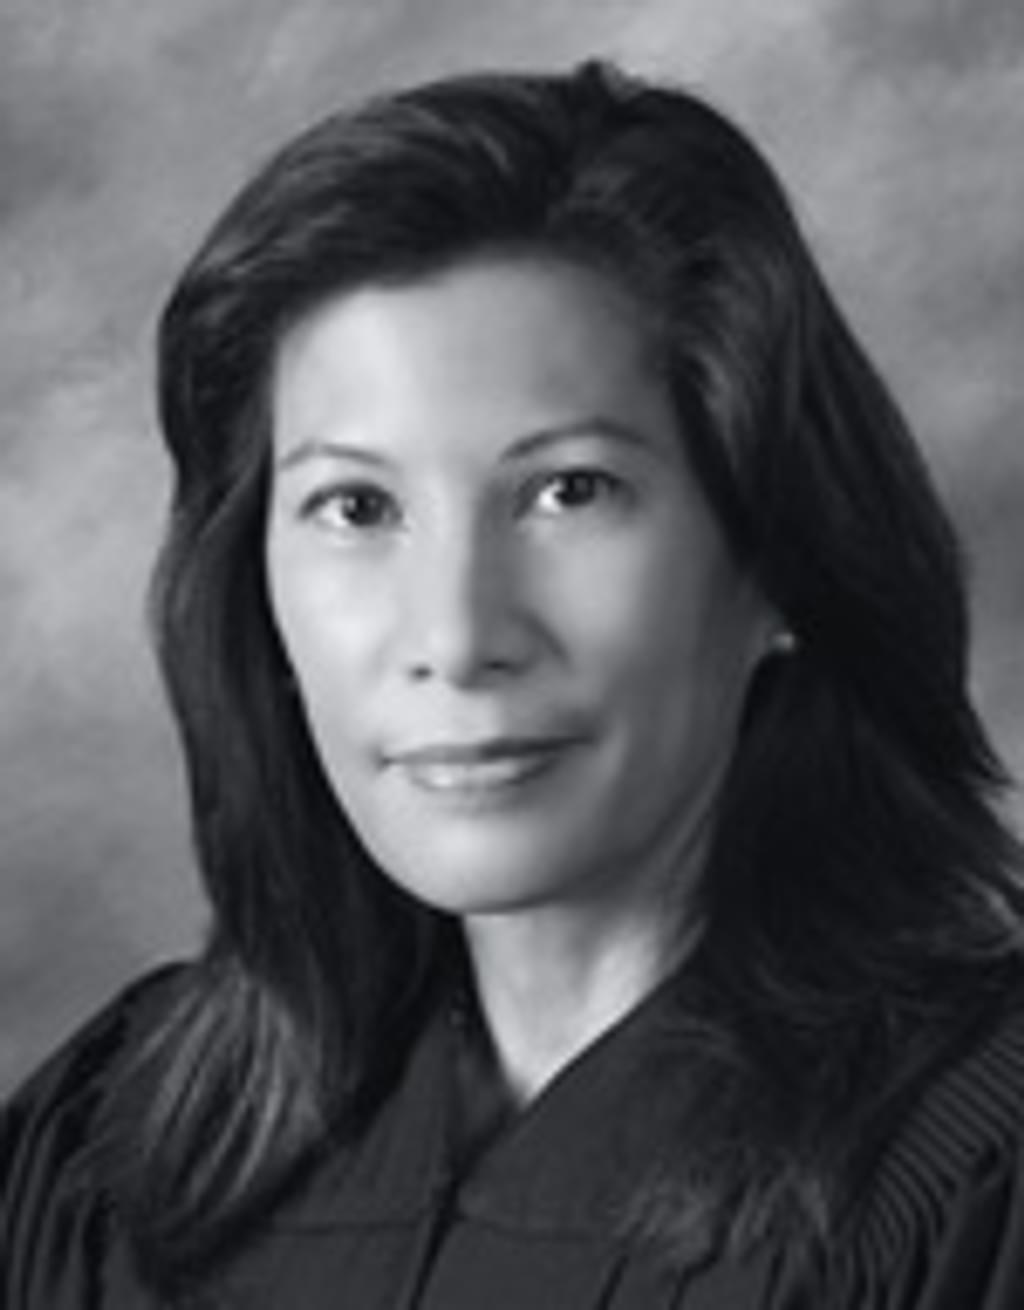 NEW VOICES: California's New Chief Justice Calls Death Penalty System Ineffective